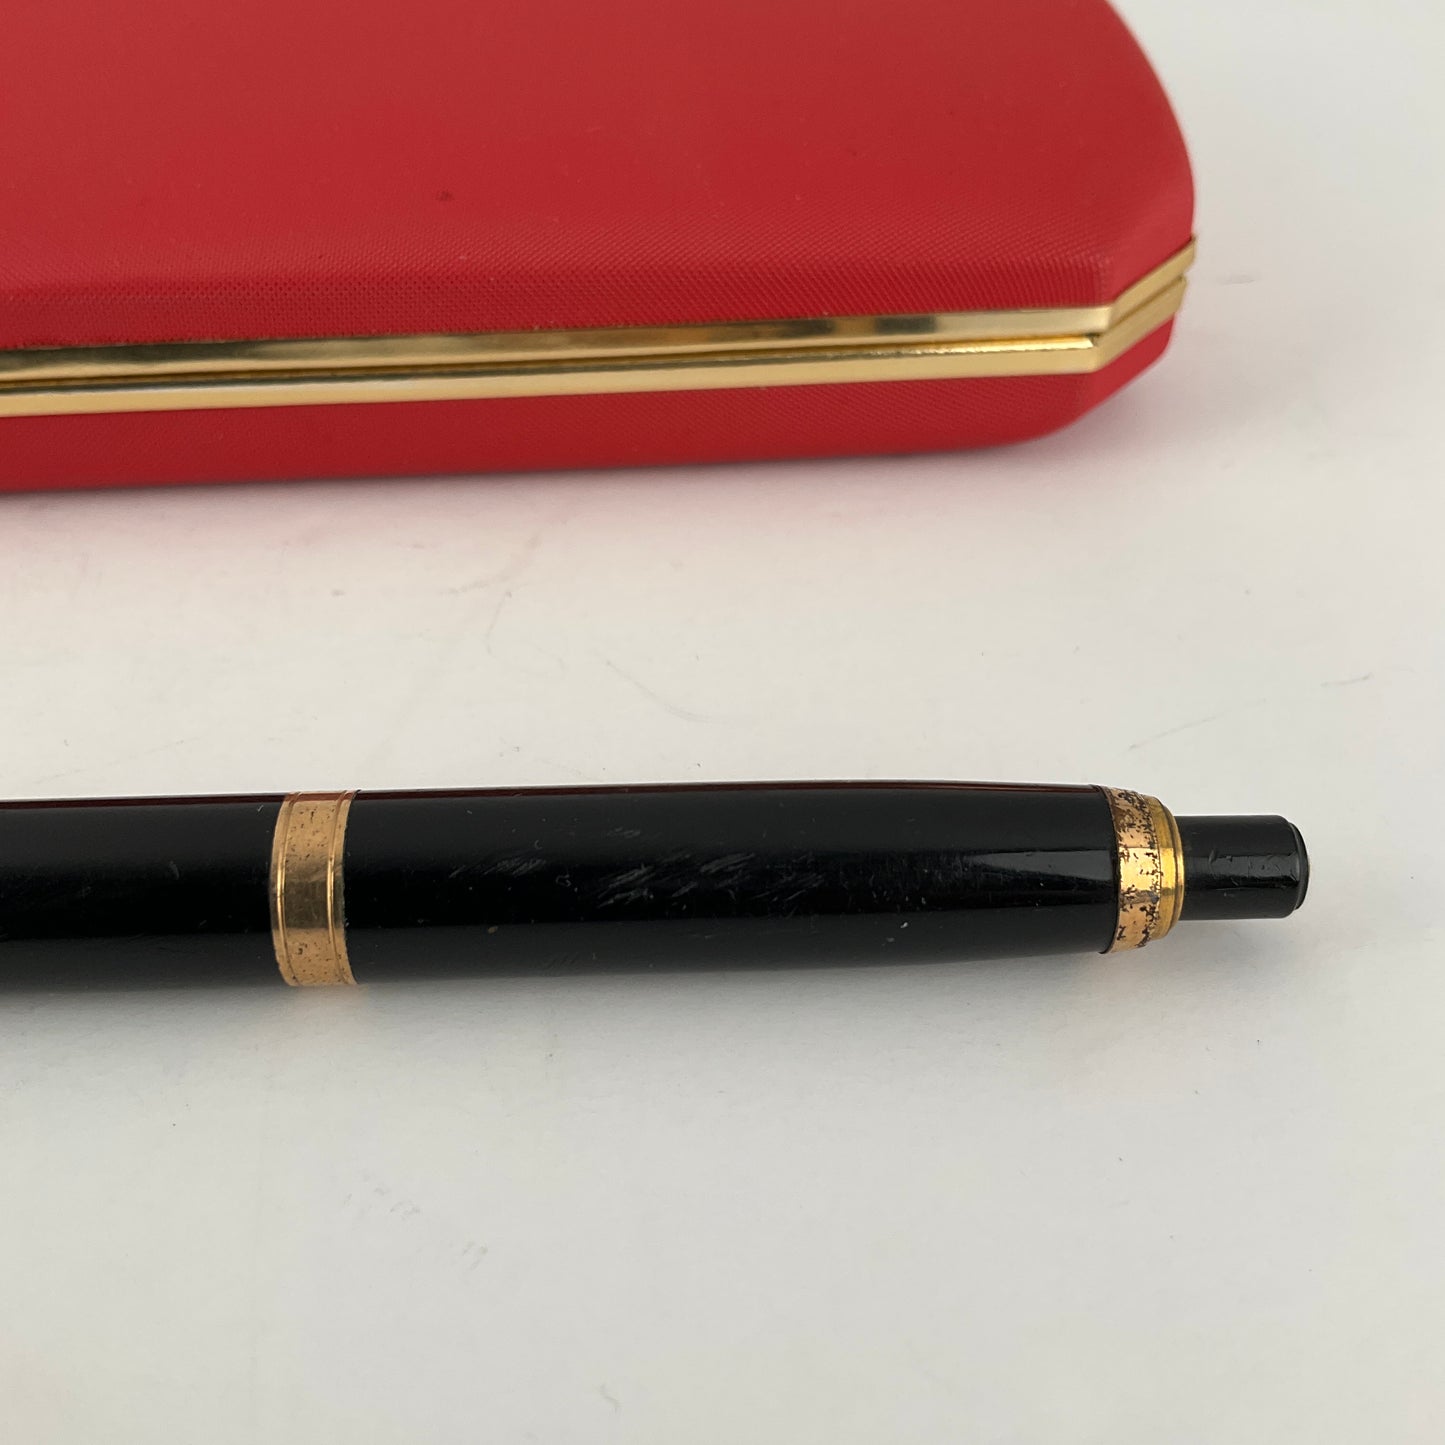 Faber Castell - Vintage Fountain Pen 833 and Pencil Set